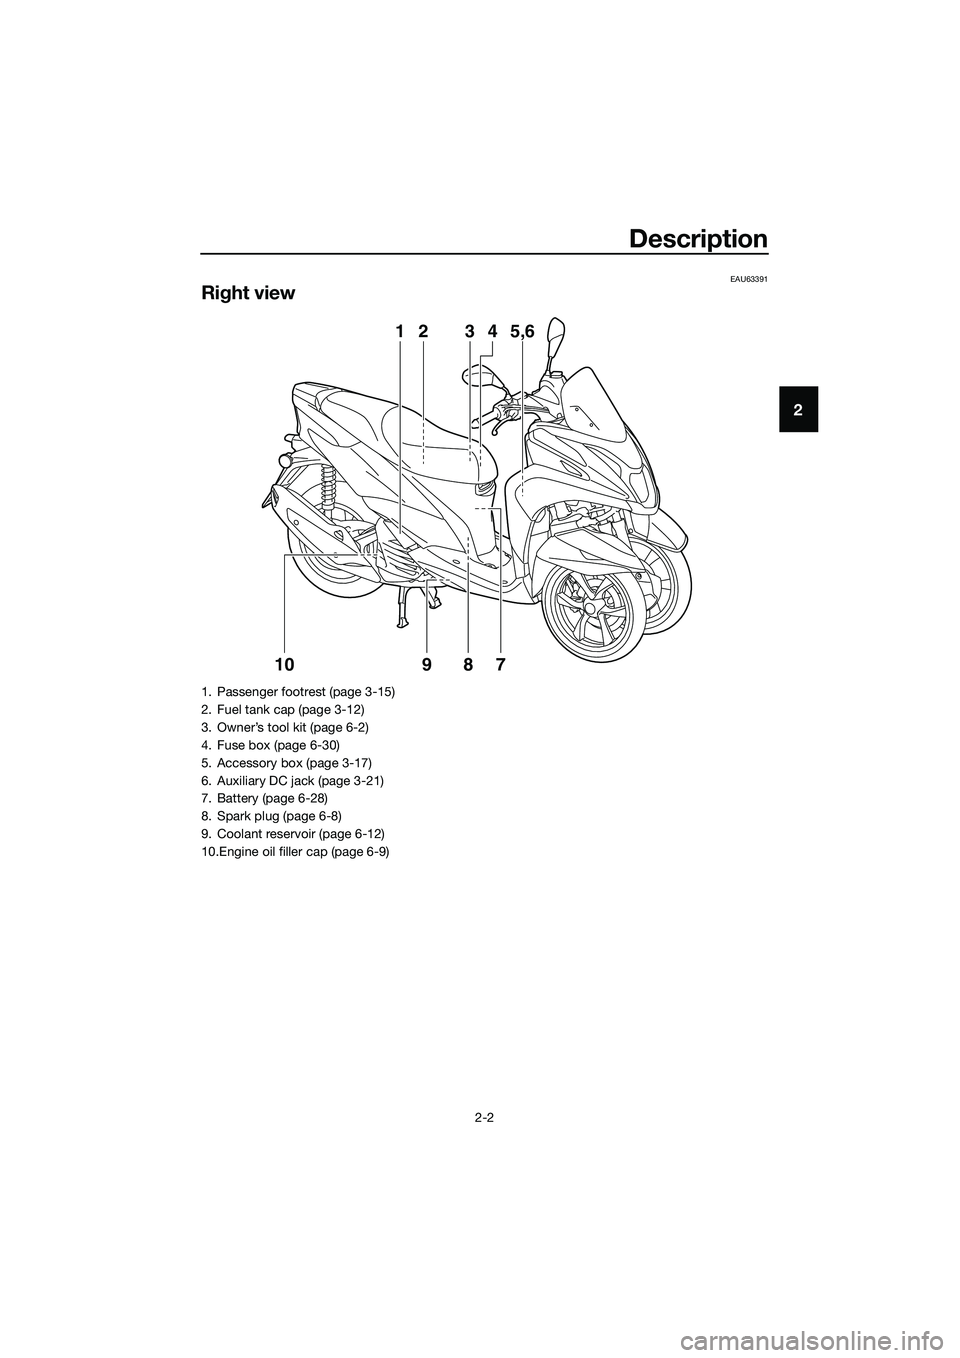 YAMAHA TRICITY 2017 User Guide Description
2-2
2
EAU63391
Right view
3 24
75,6 1
10
98
1. Passenger footrest (page 3-15)
2. Fuel tank cap (page 3-12)
3. Owner’s tool kit (page 6-2)
4. Fuse box (page 6-30)
5. Accessory box (page 3